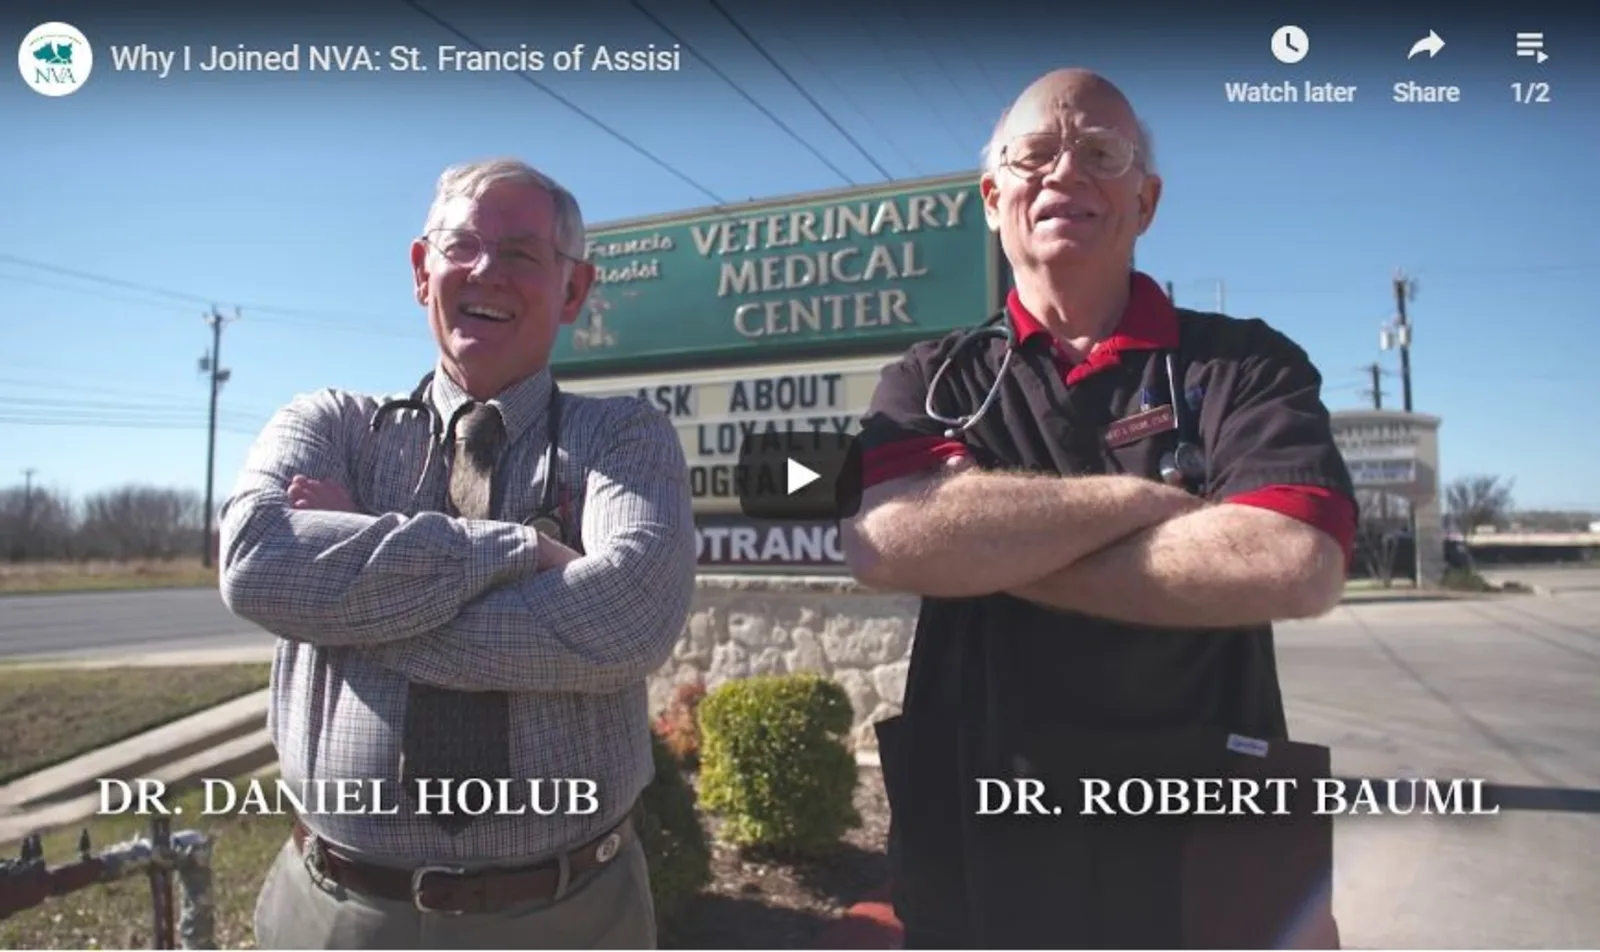 St. Francis of Assisi Veterinary Medical Center Testimonial Video